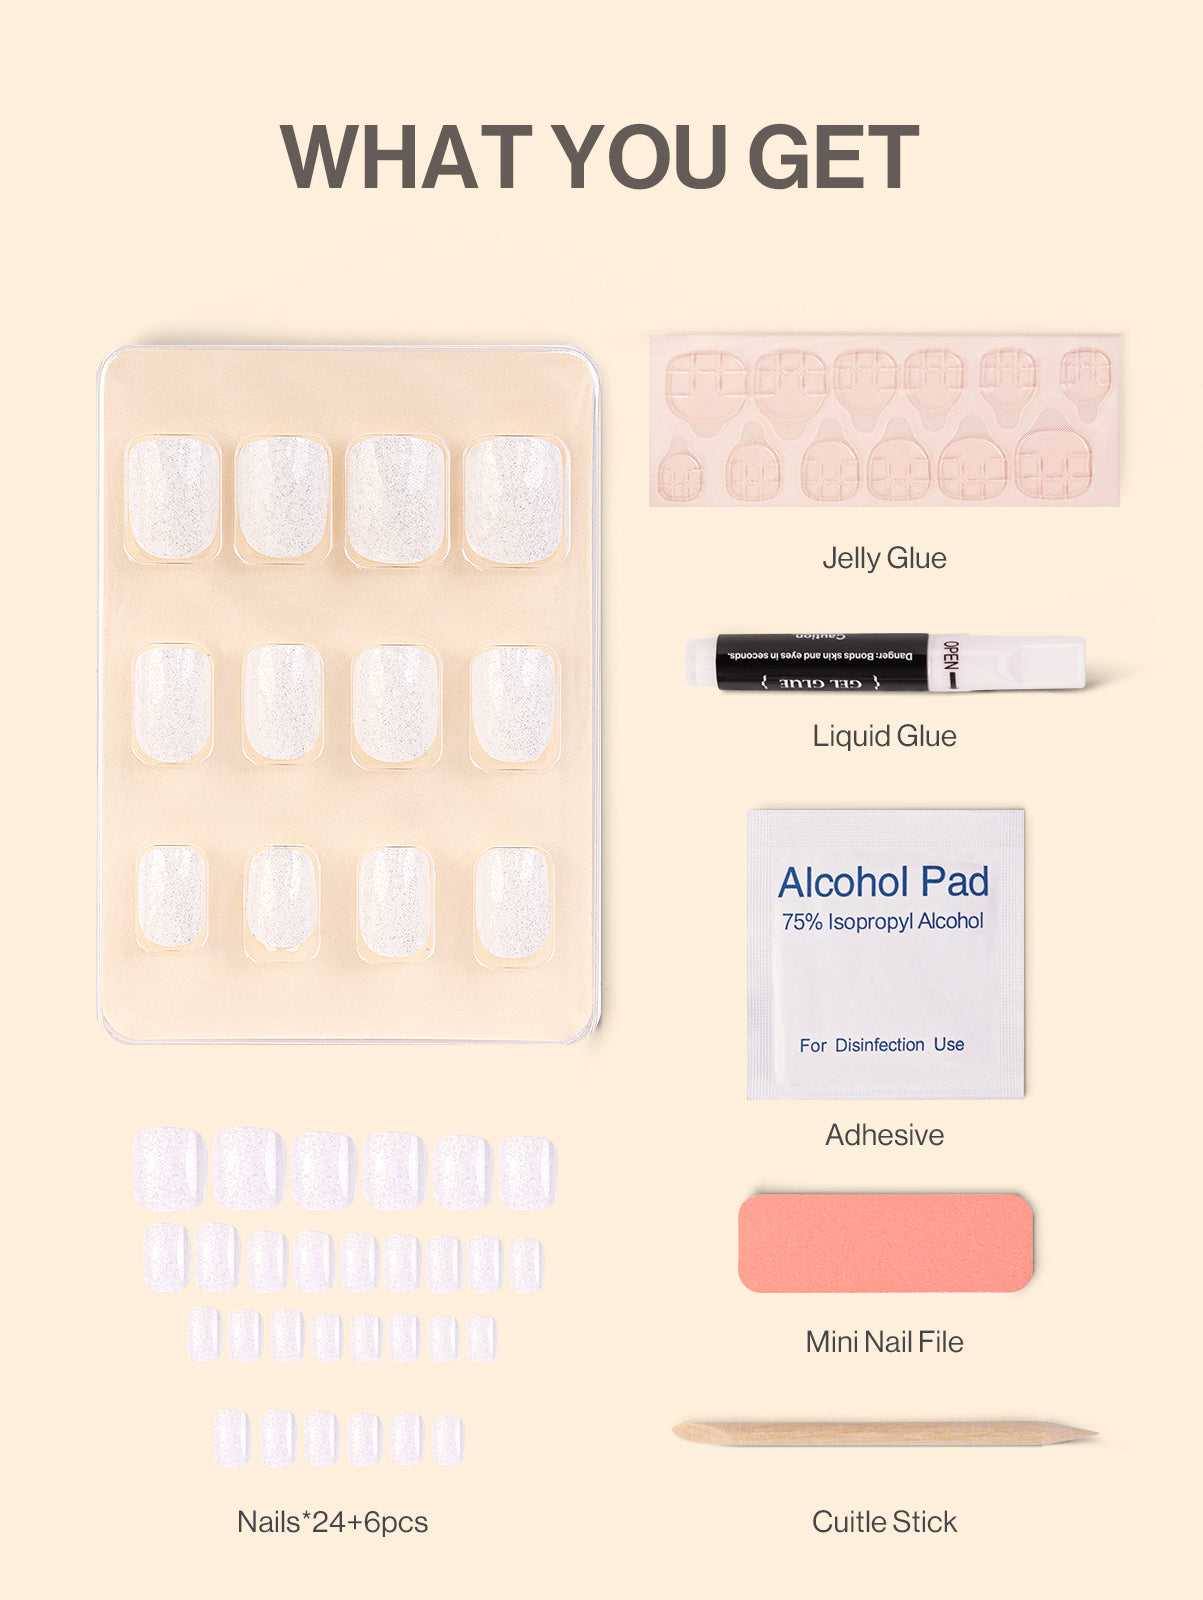 12 Packs (288 Pcs) Press on Nails Medium and Short Misssix Short Fake Nails  French Tip Press on Nails Almond and Square Glue on Nails with Nail Glue  for Women Design Press